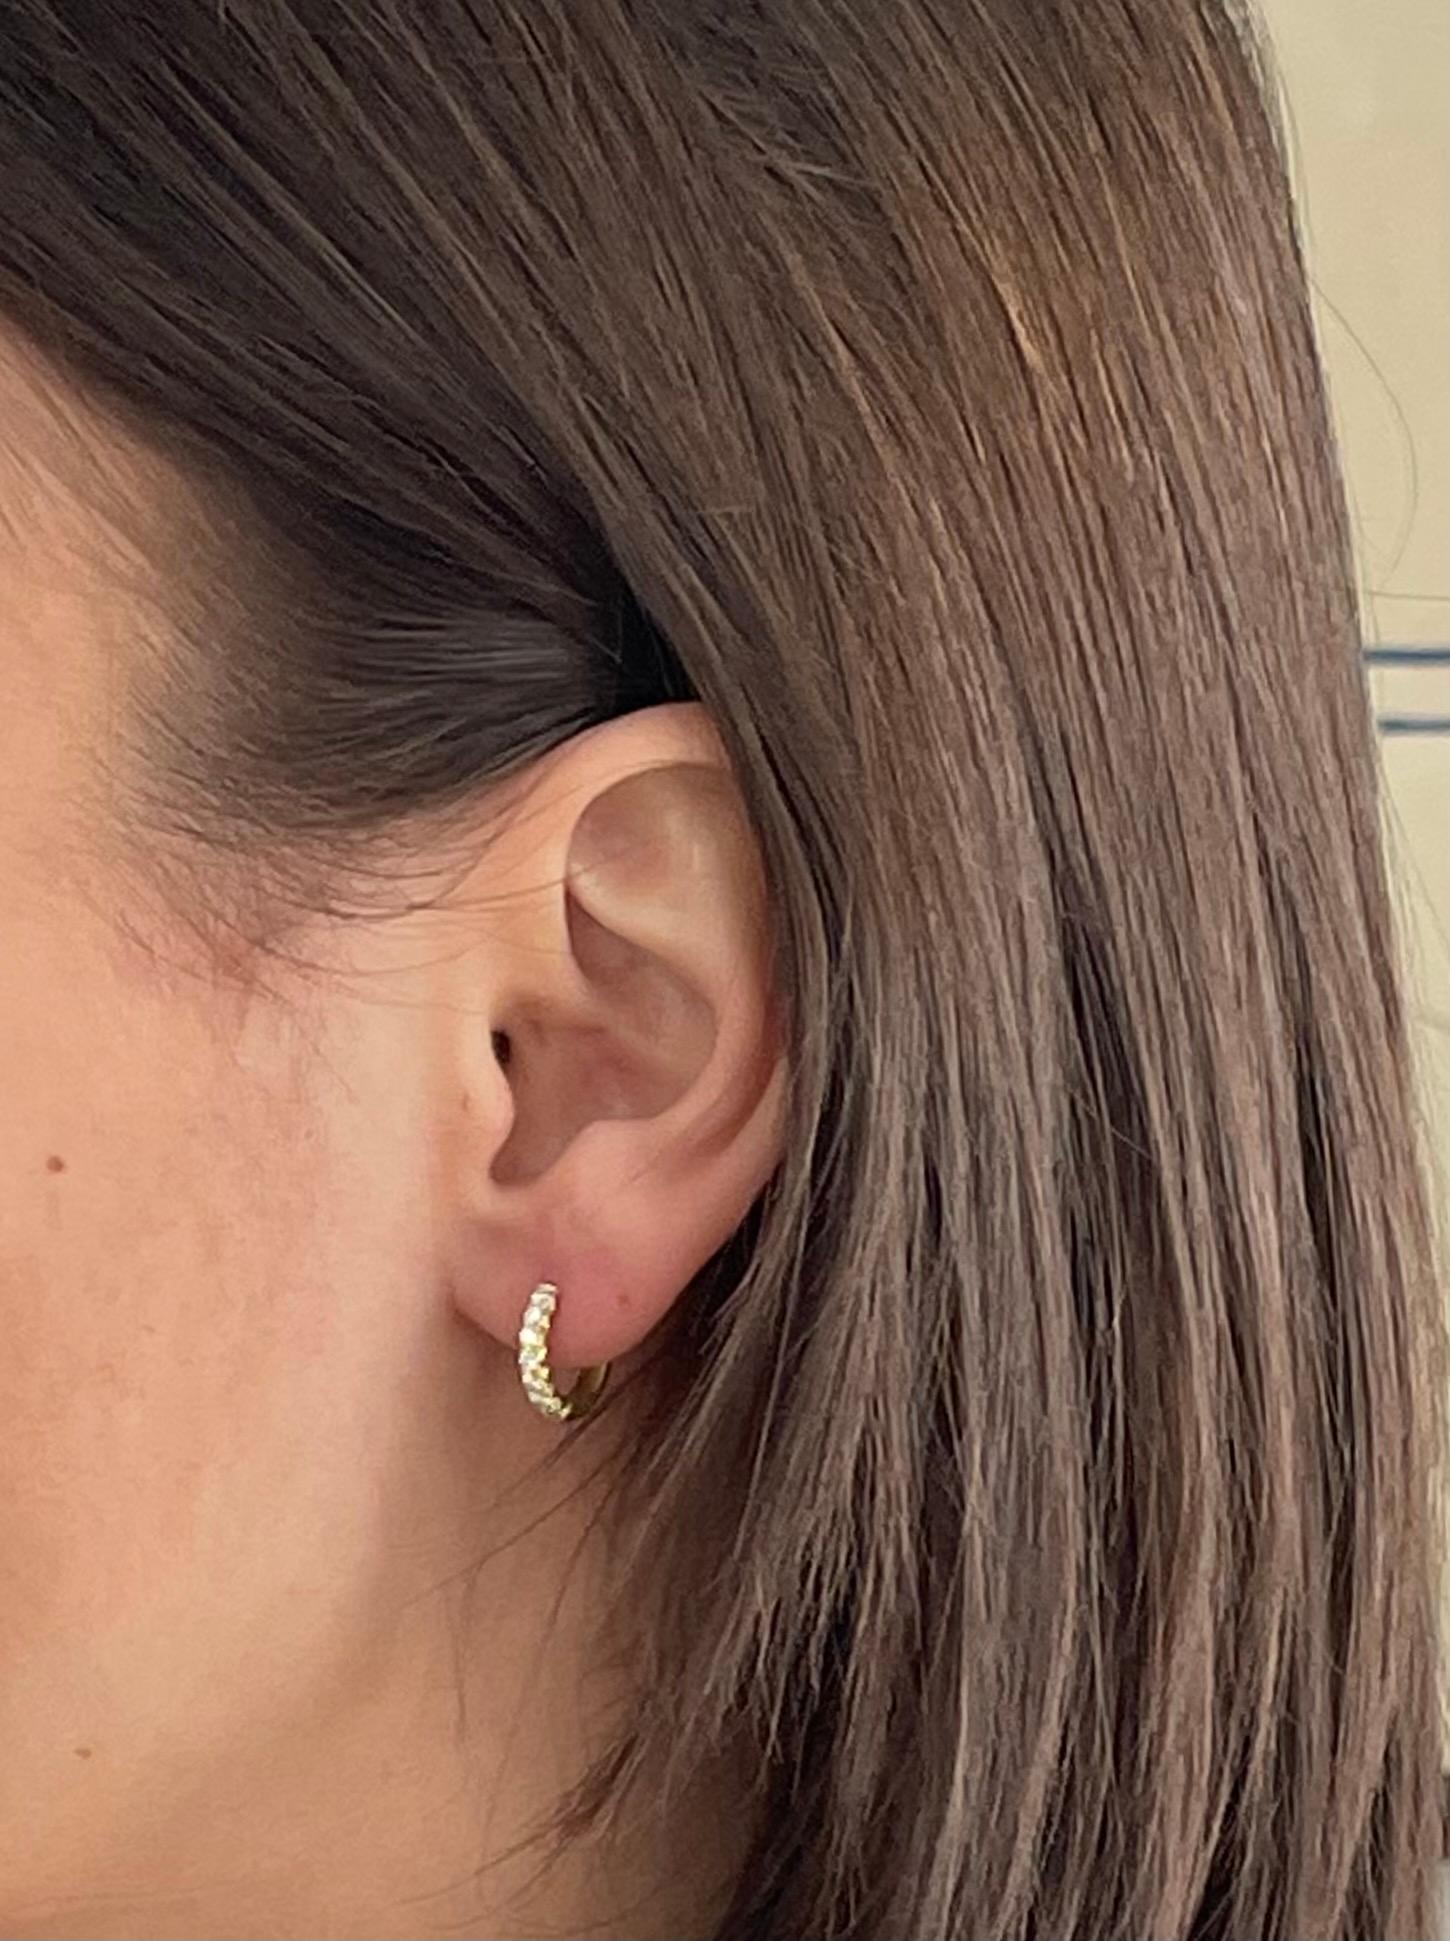 Handcrafted 18k gold* hoops with micro pave diamonds. The matte finish enhances the bright sparkle of the diamonds and conveys understated elegance. Perfect with jeans or formal attire...A truly stylish way to way to hug your ears. Made in the